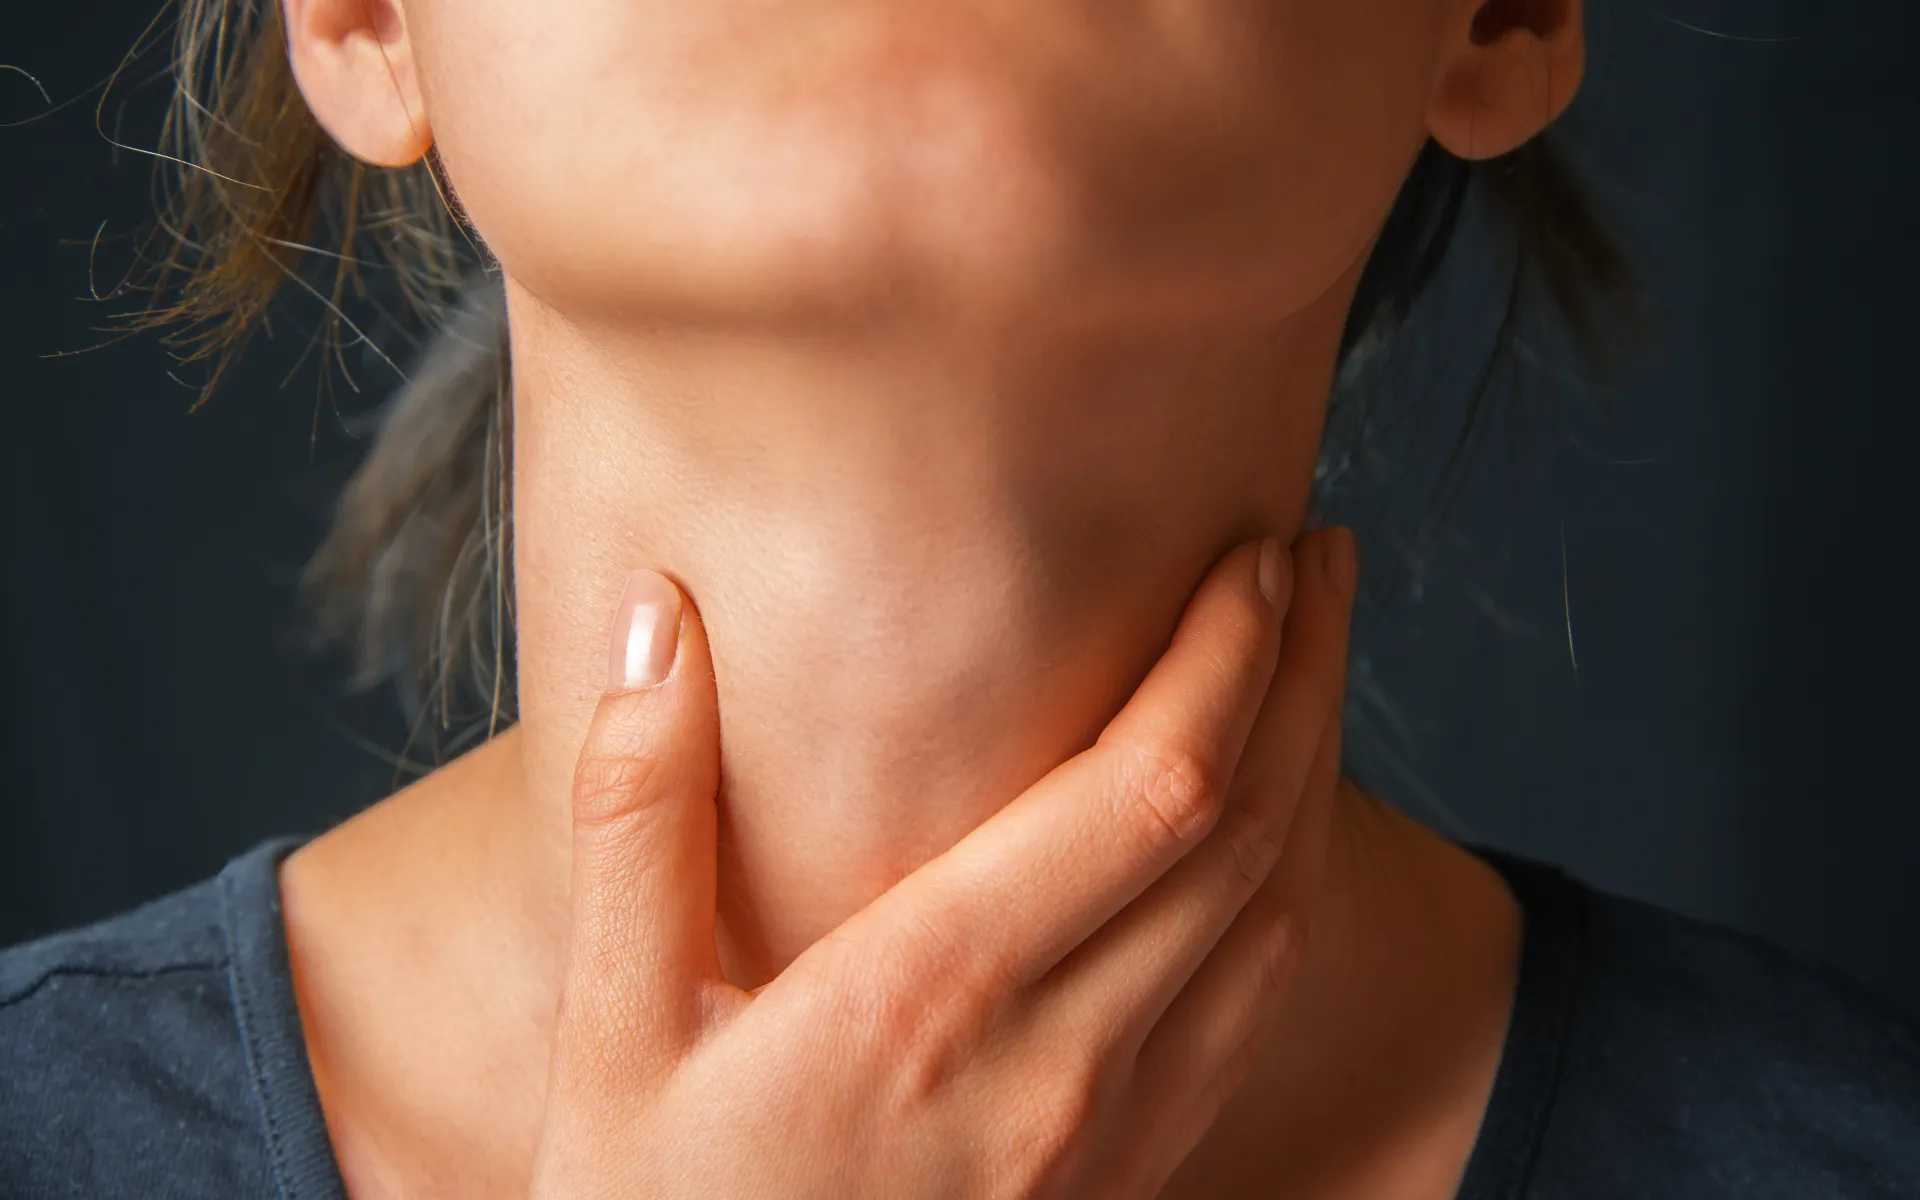 Is It Strep Throat? Here’s How to Tell